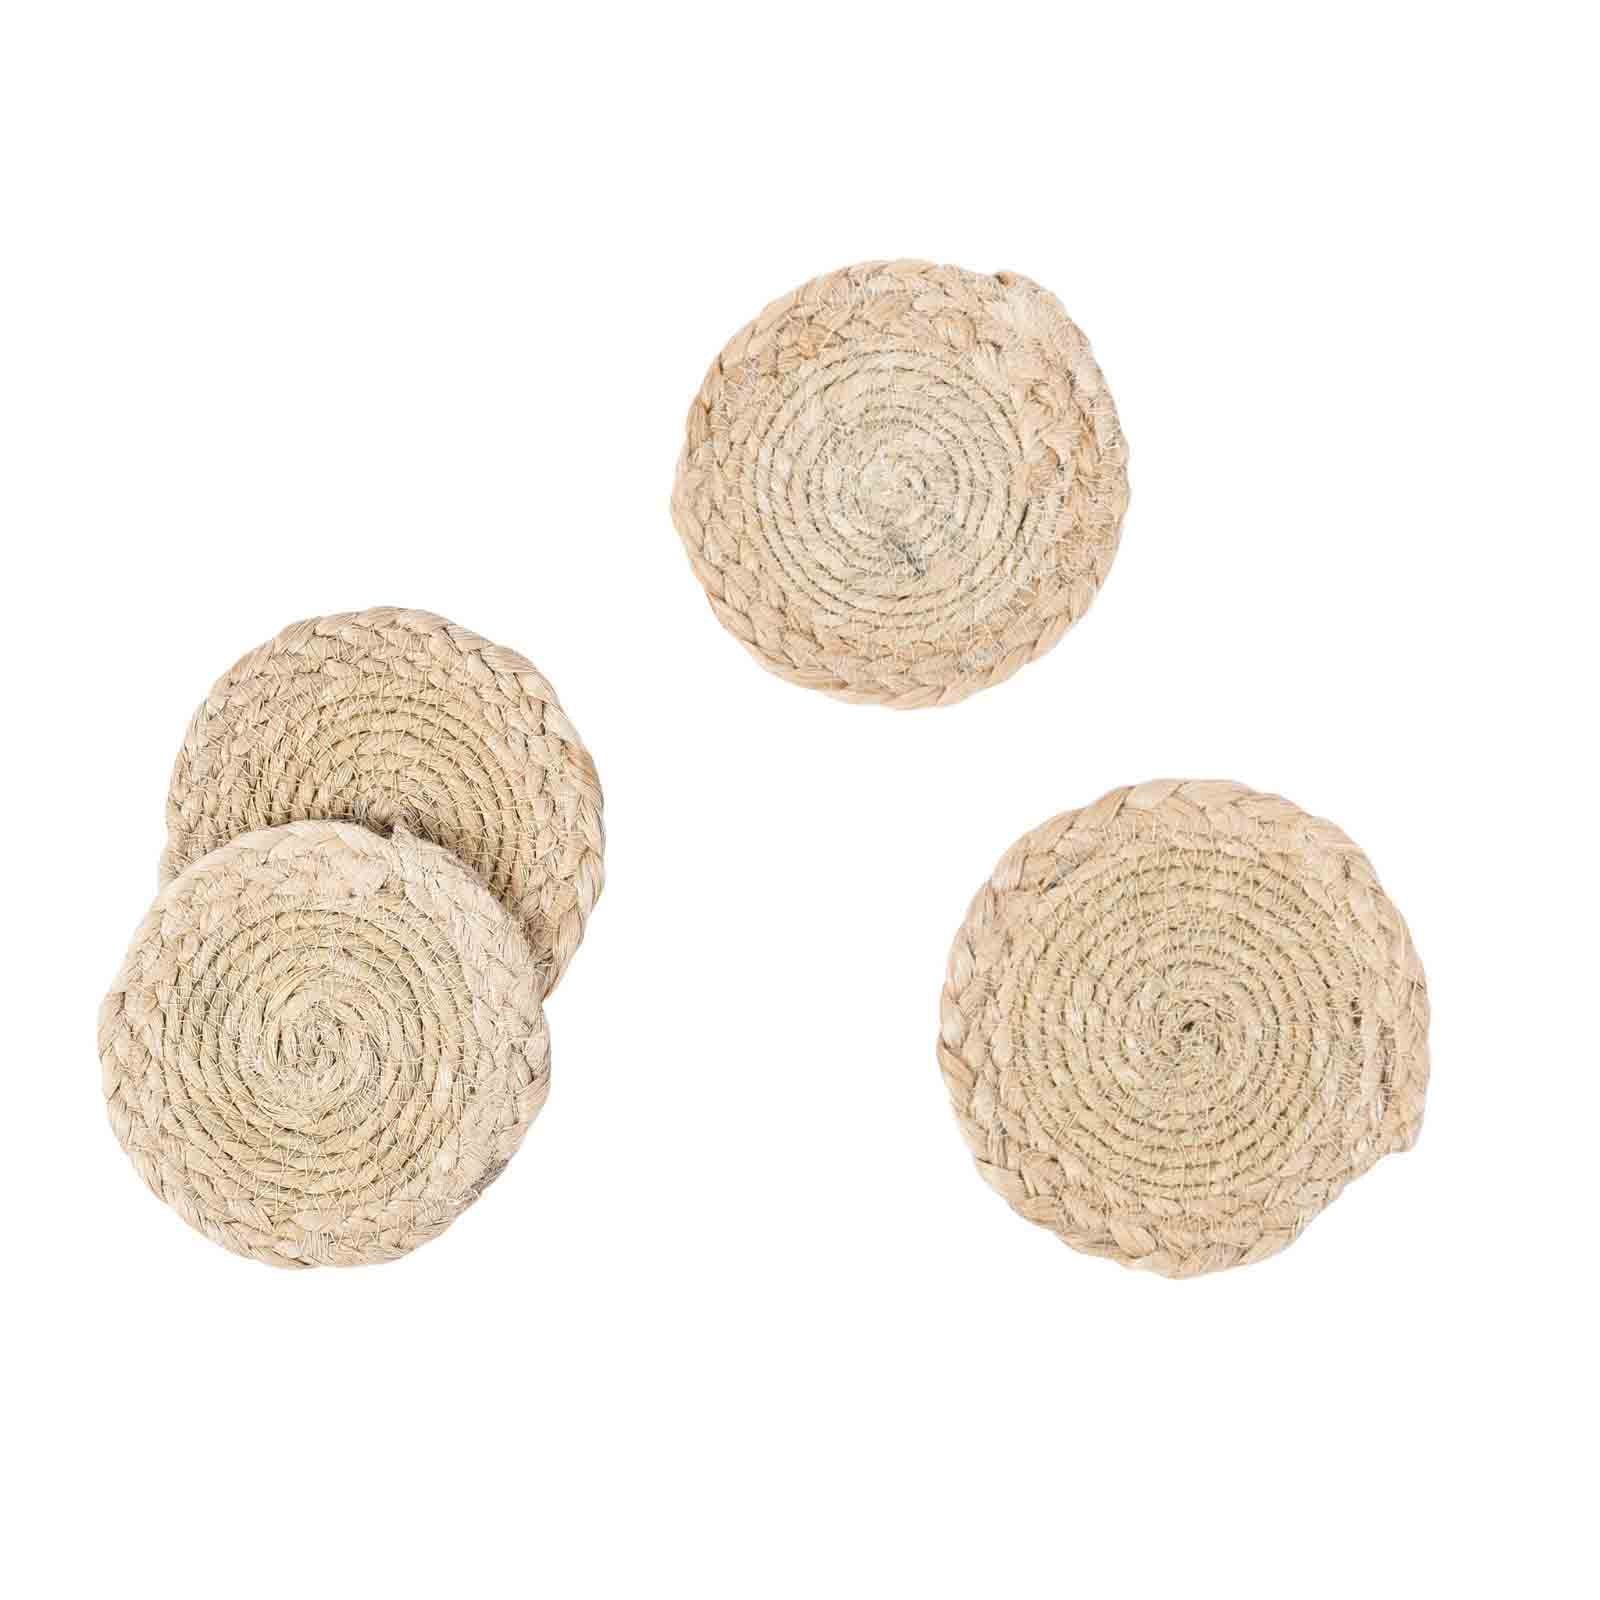 Braided Jute Coaster<br>Size: 5" Round<br>Set of 4<br>Color Natural